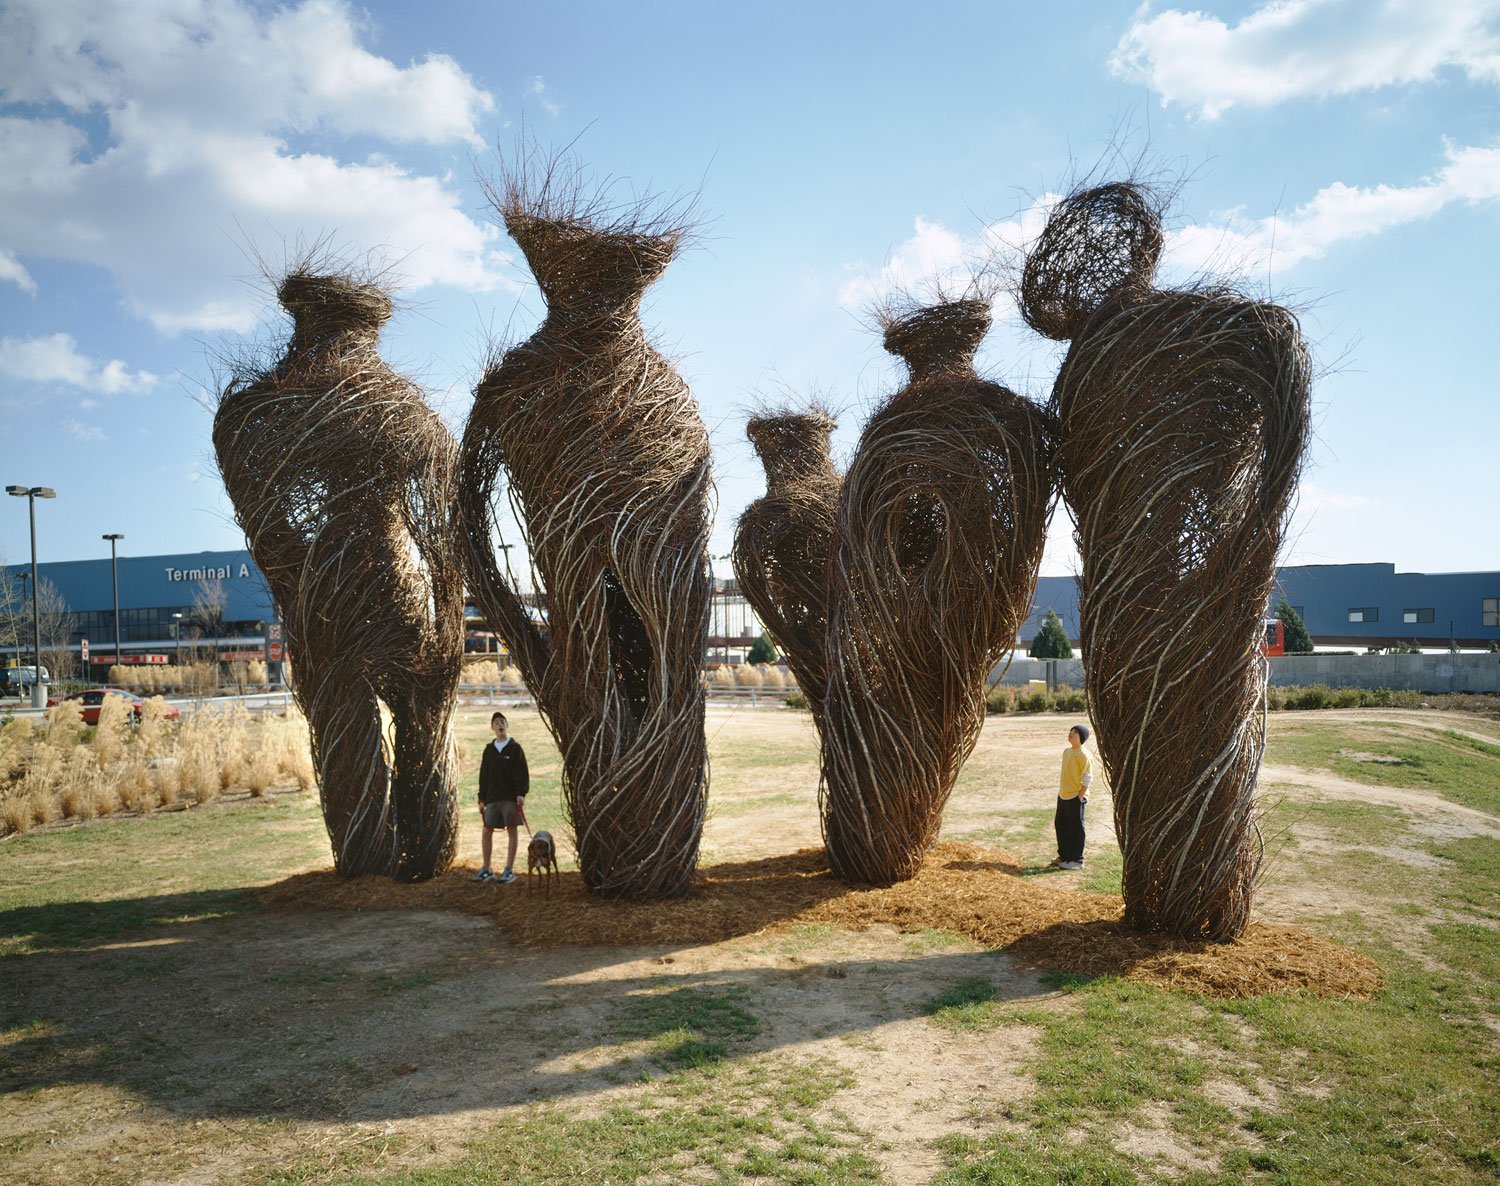 Patrick Dougherty’s Poetic and Beautiful Woven Sculptures